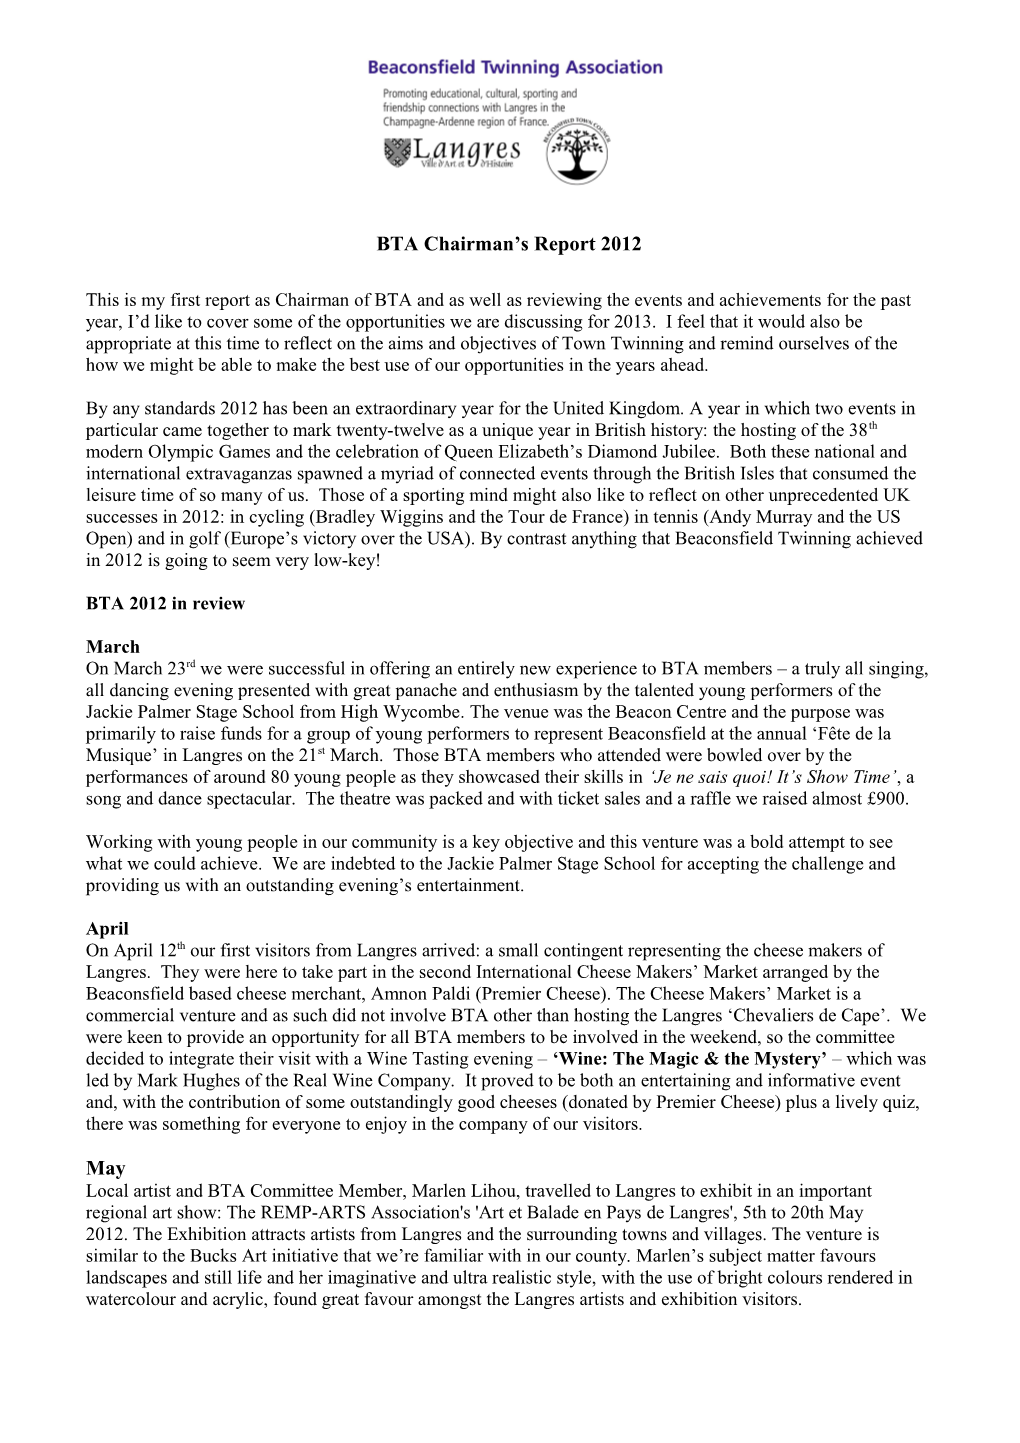 This Is My First Annual Report As Chairman of BTA And, As Well As Reviewing the Events